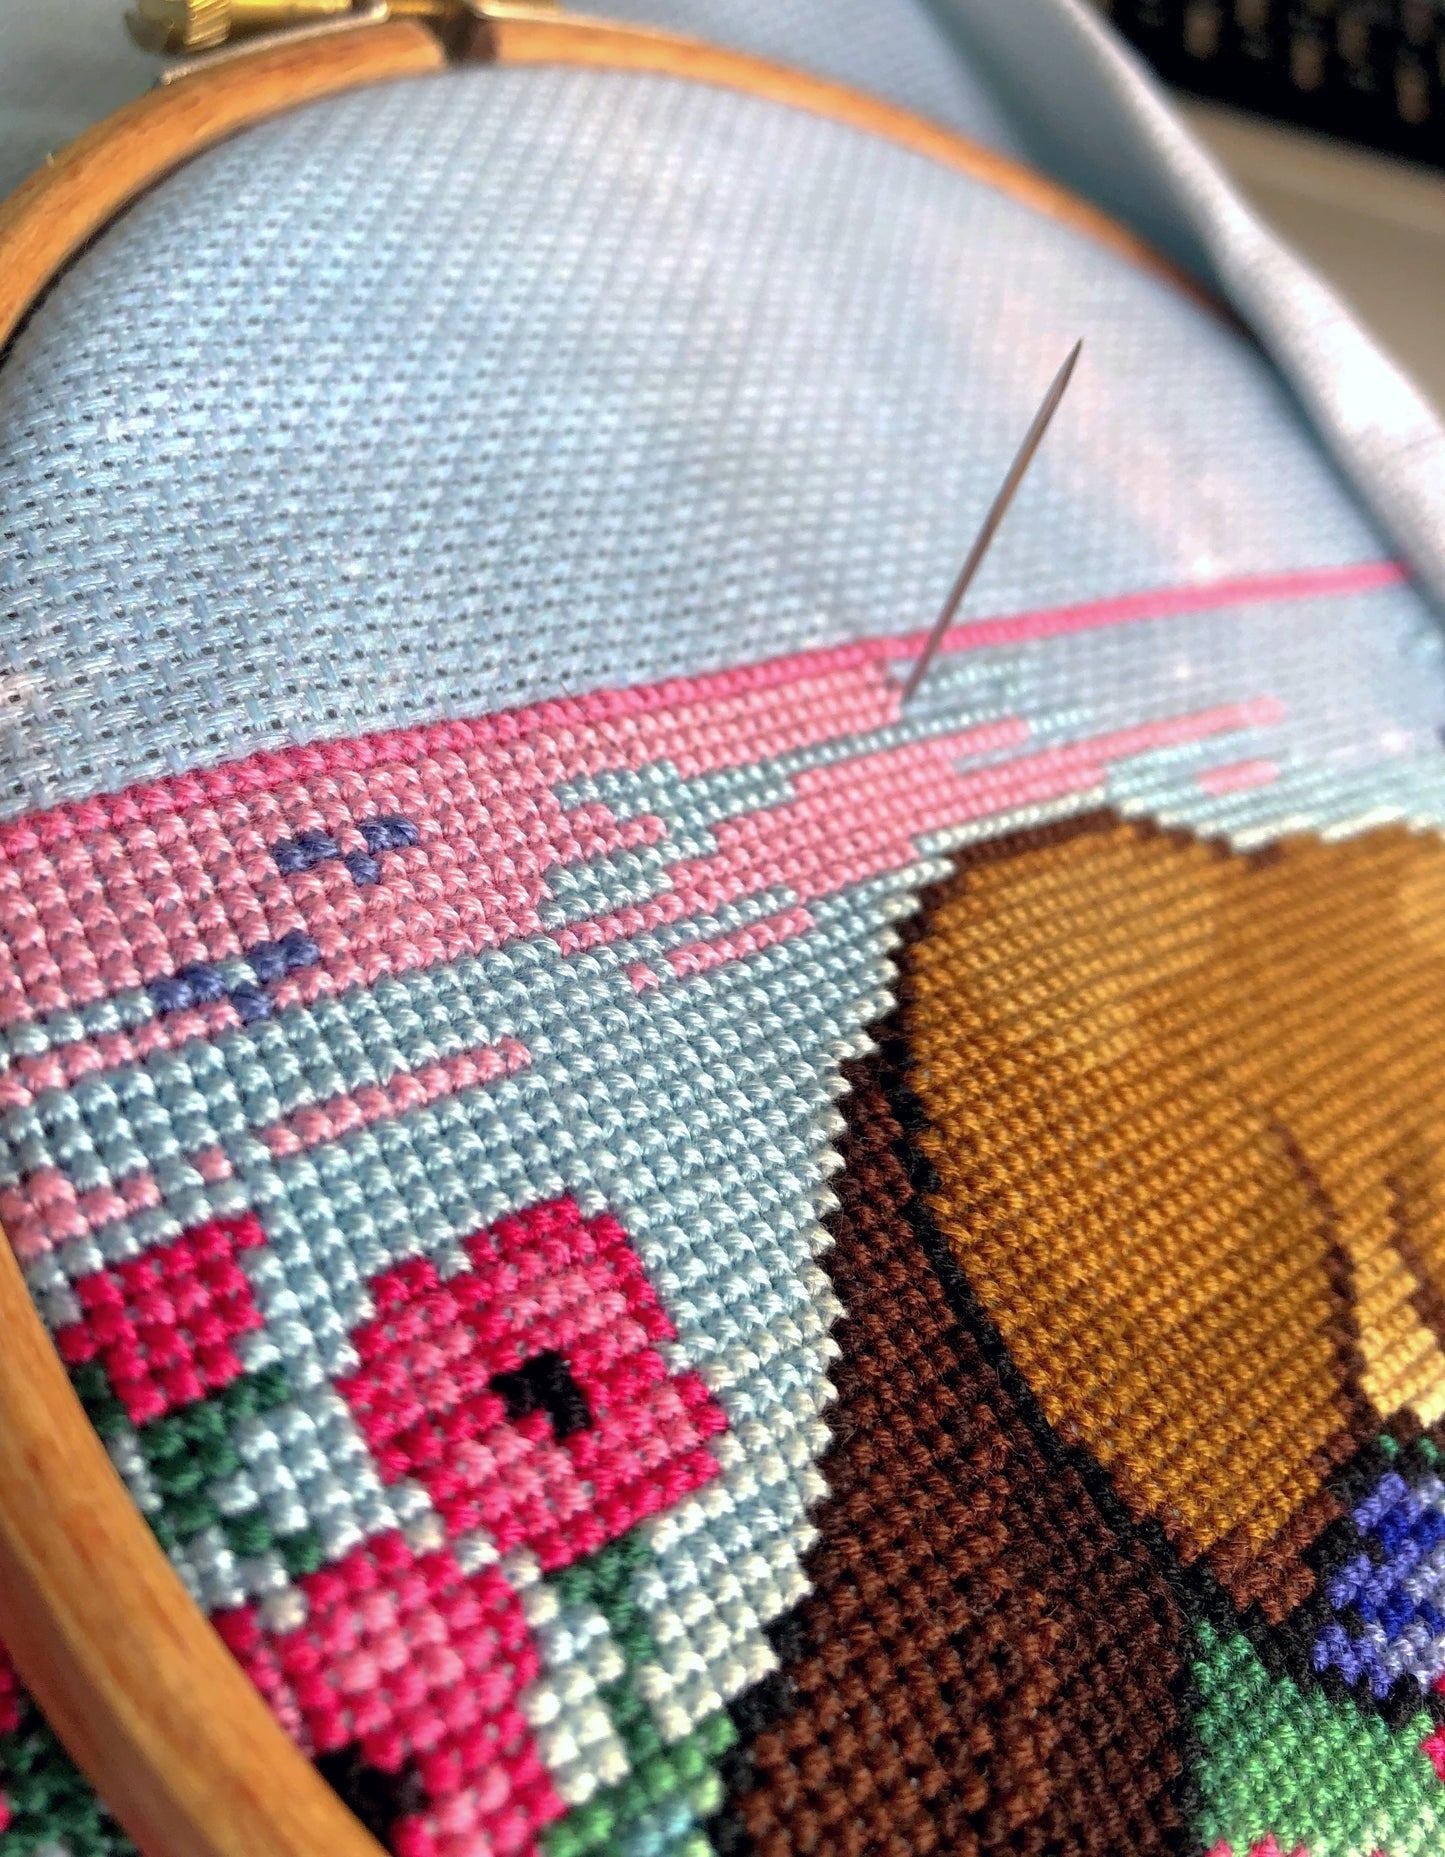 Work in progress on Platypus cross stitch pattern. Needle is visible and is stiching through the 16ct Aida fabric. The pink and blue sky with birds is being stitched. Stitches are fluffy and tidy. Danish stitching method is used. 